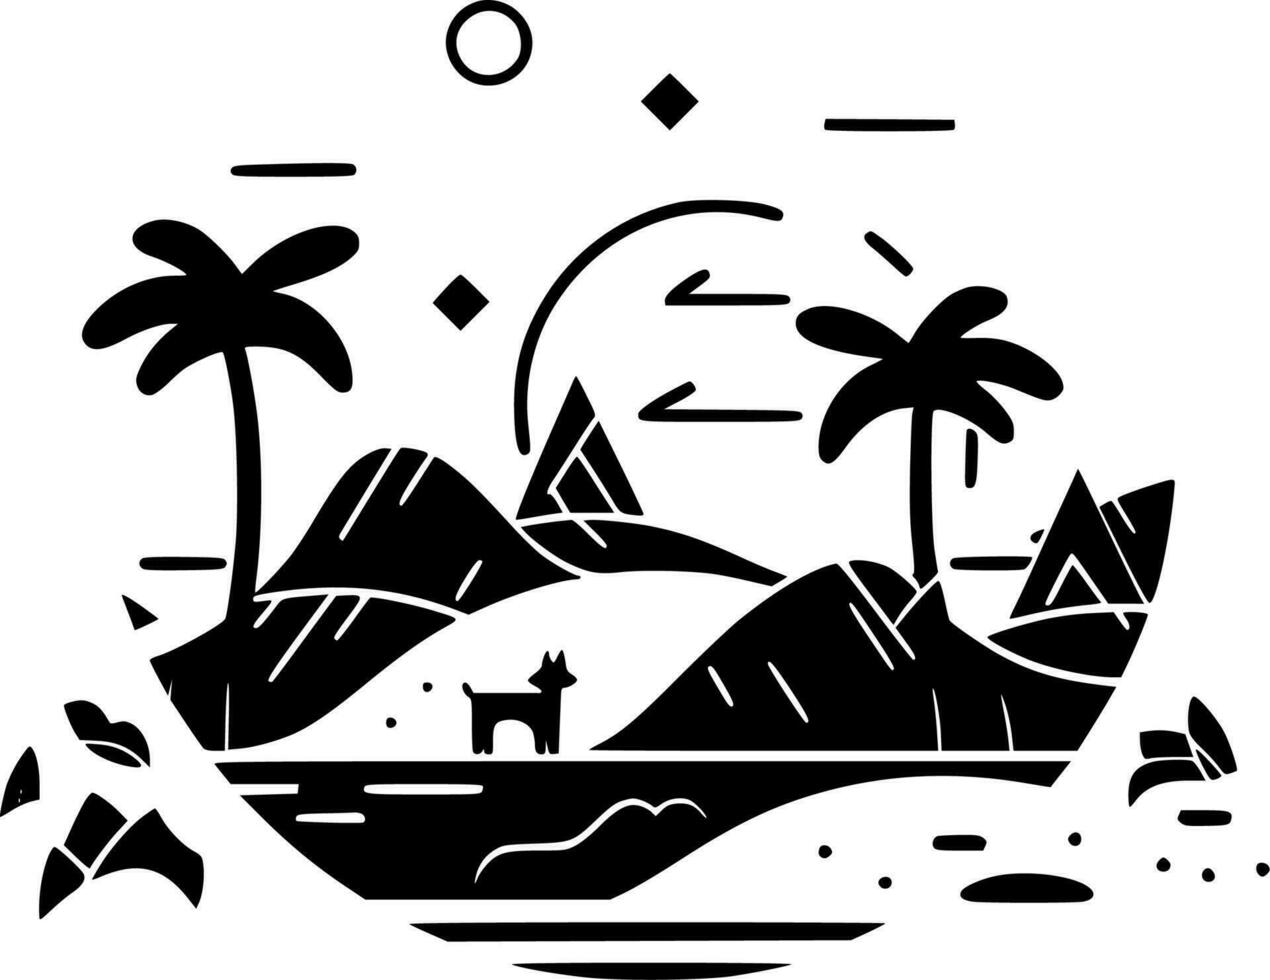 Beach Background, Black and White Vector illustration